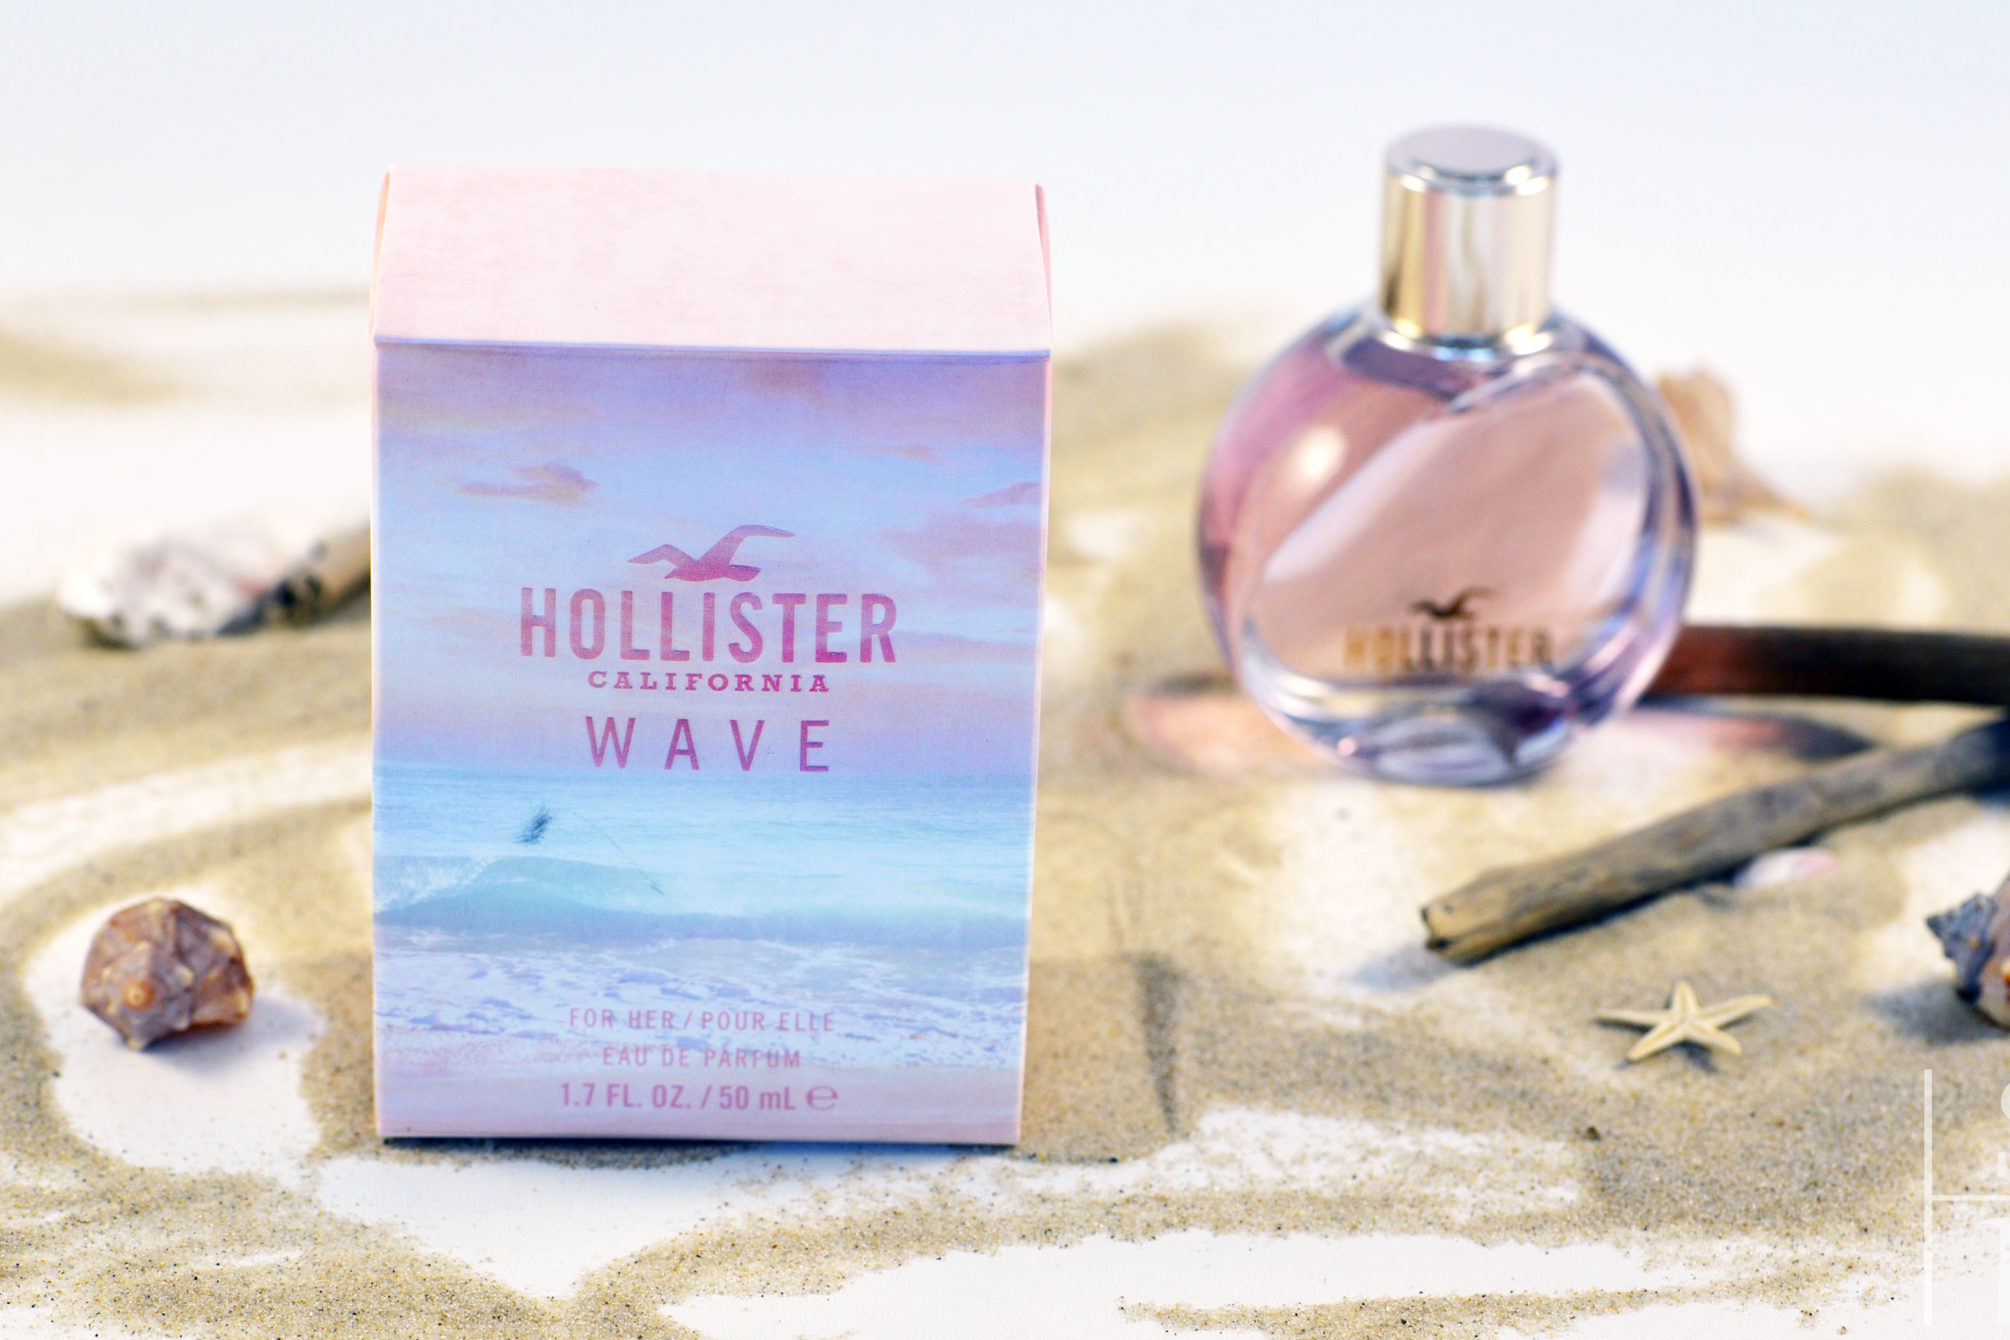 Hollister Wave for Her